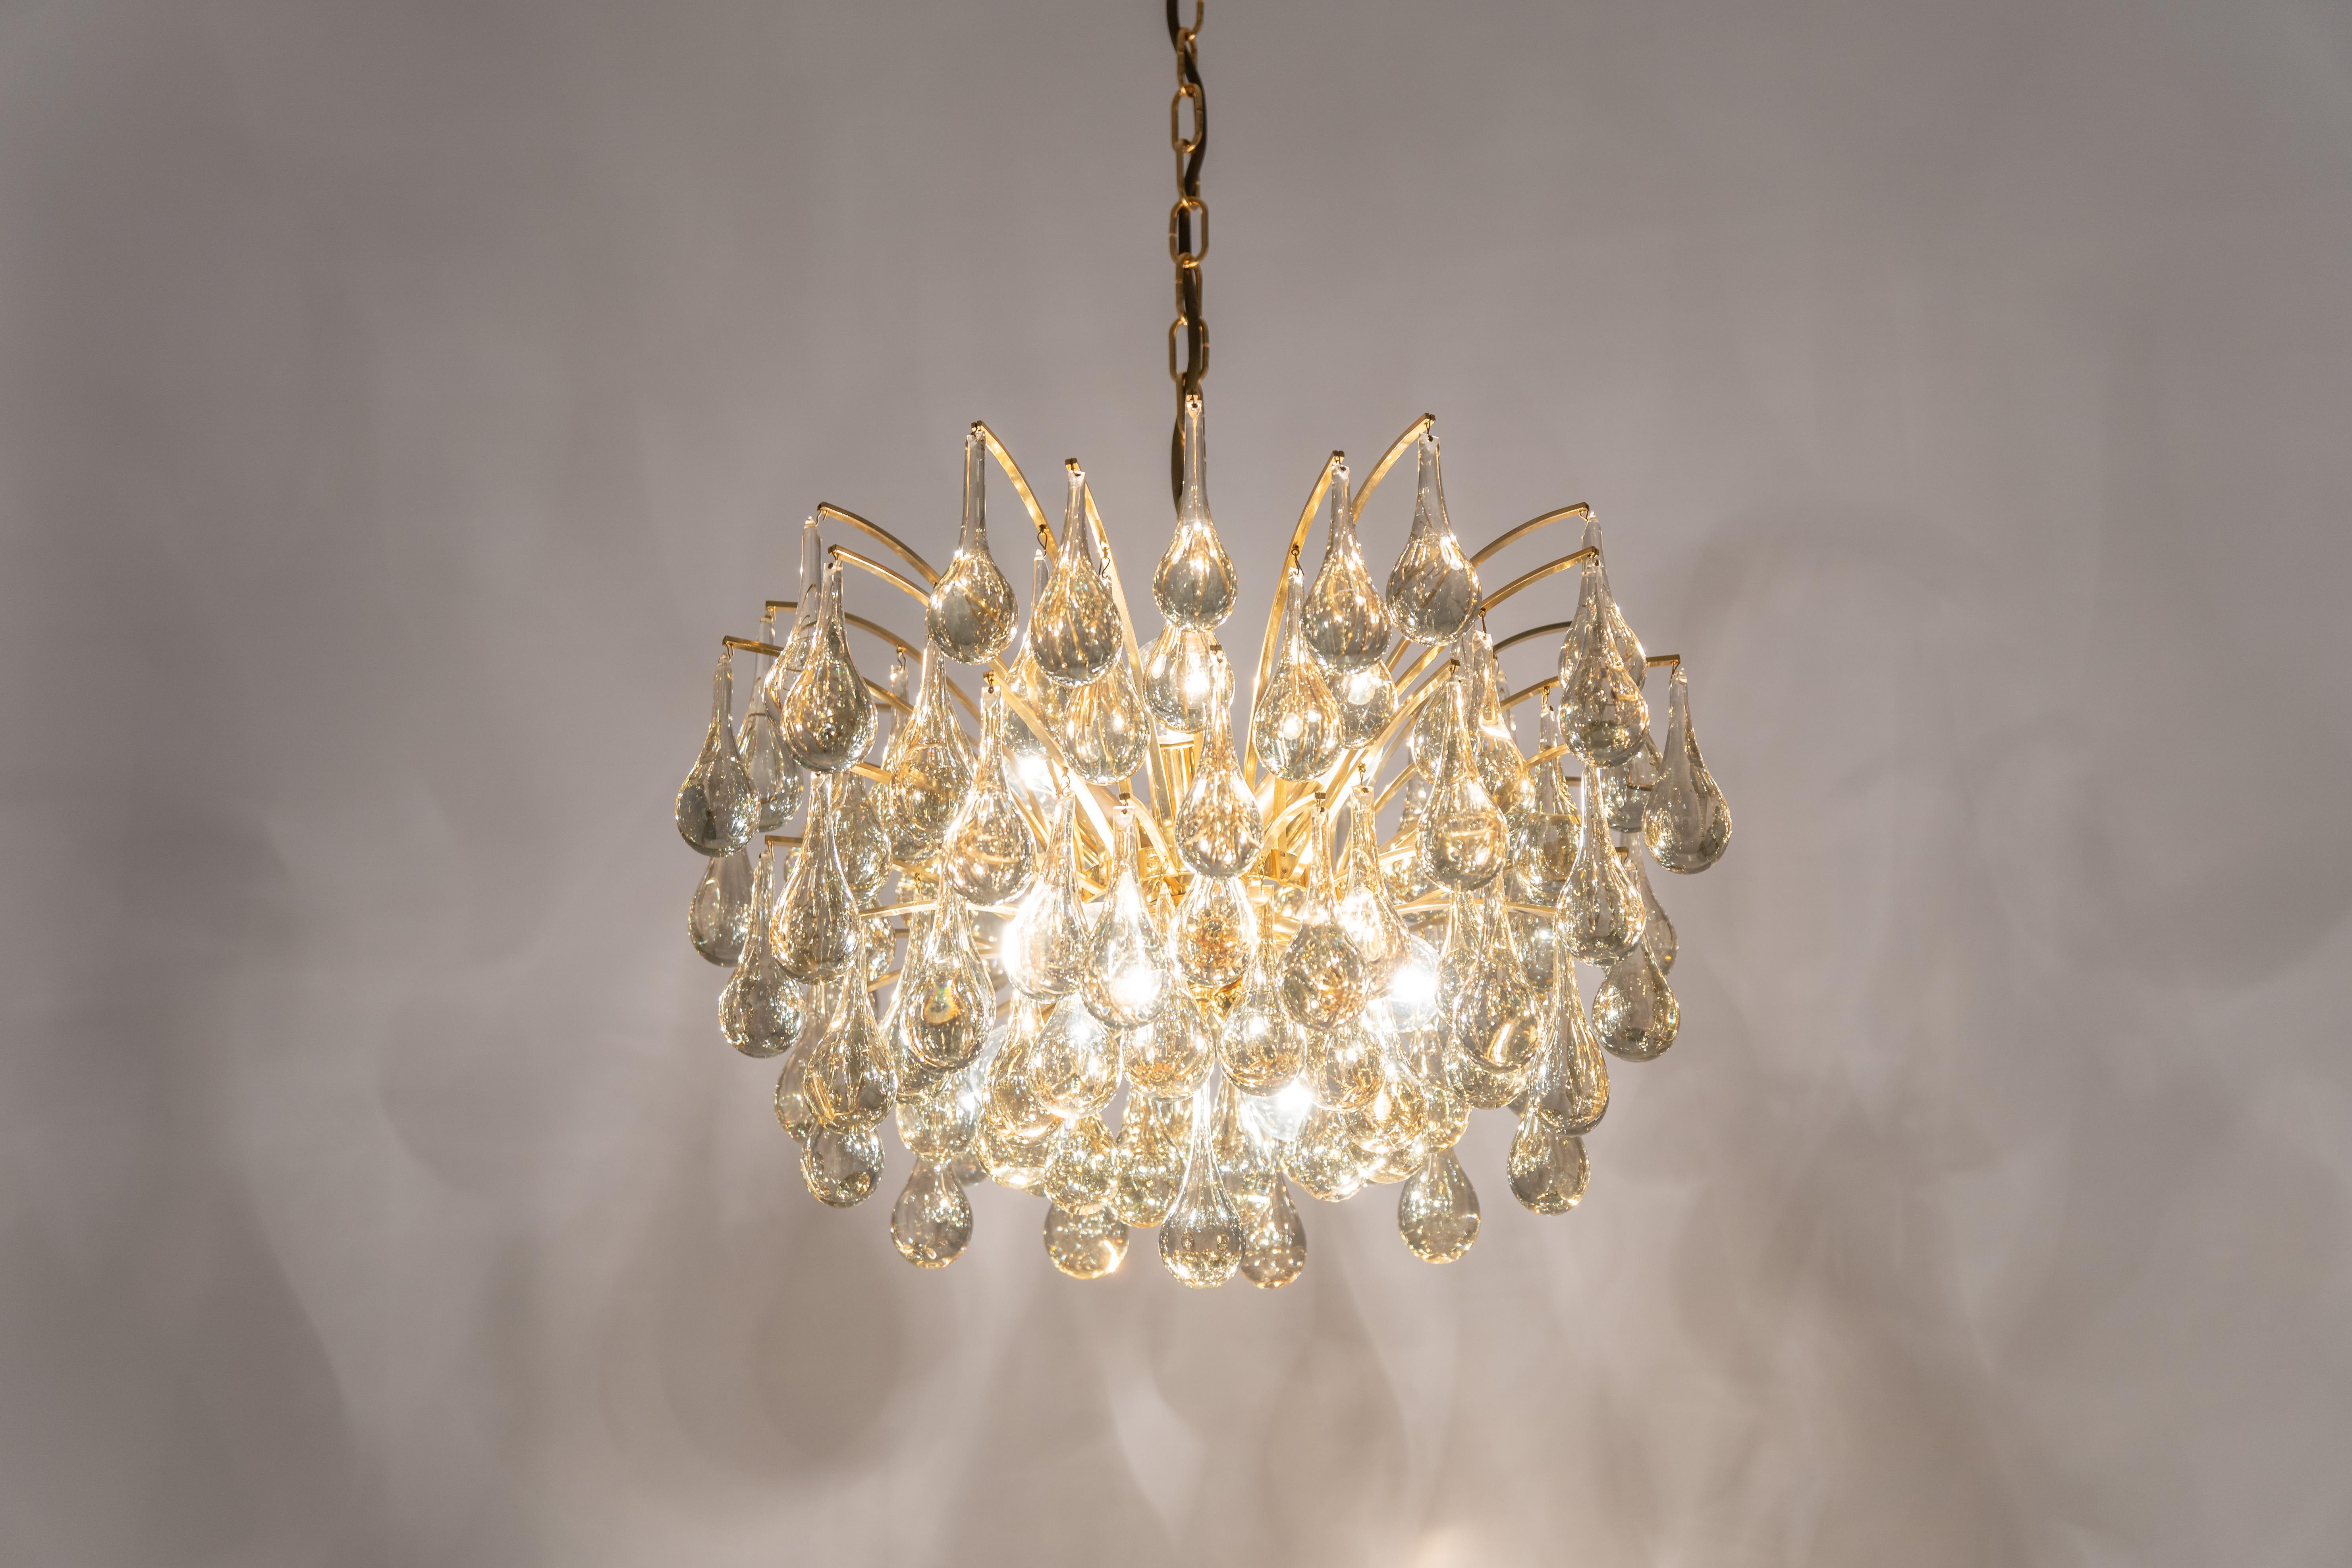 Large Murano Glass Tear Drop Chandelier, Christoph Palme, Germany, 1970s For Sale 5